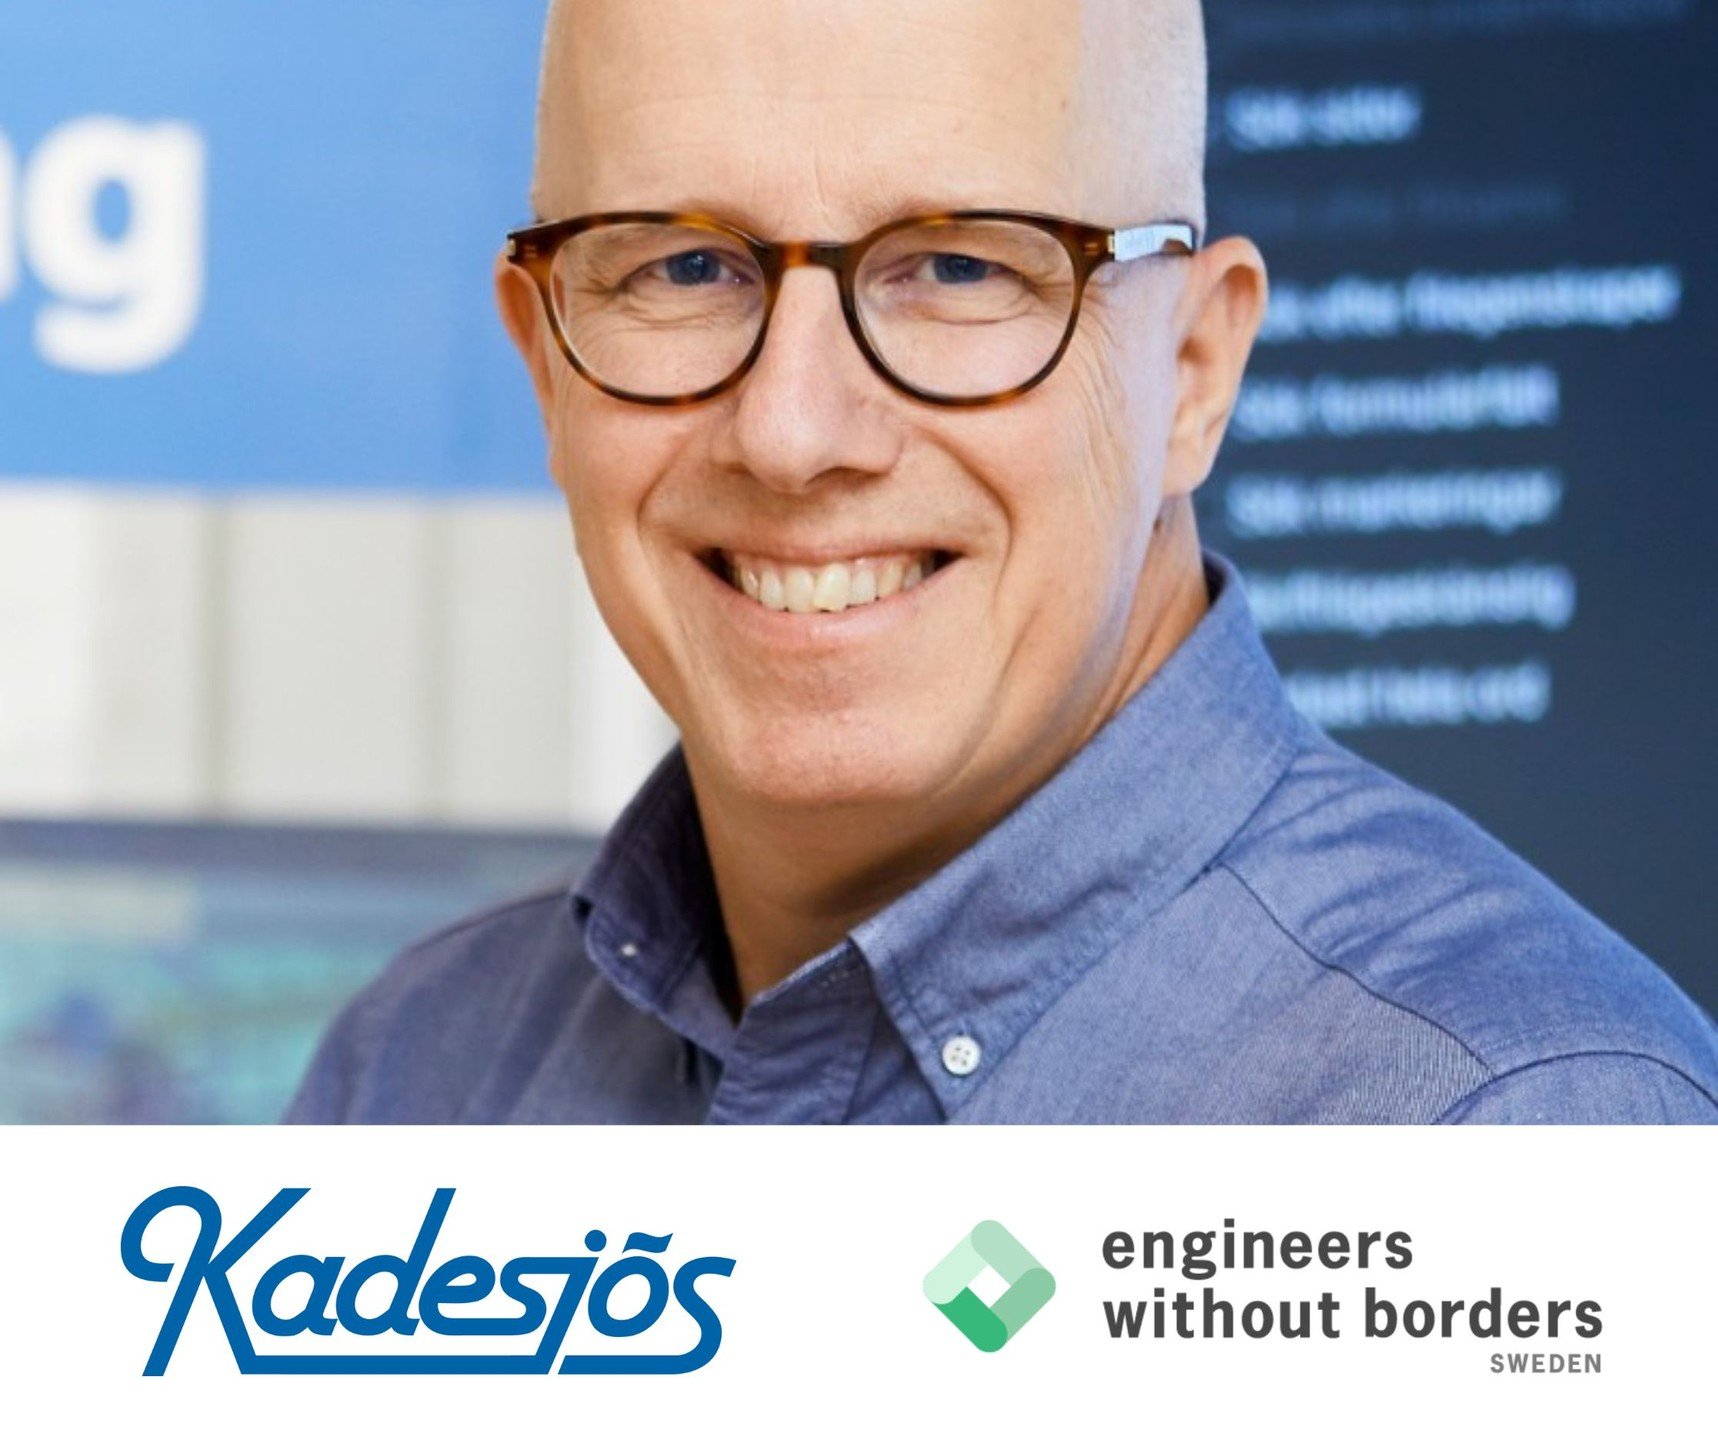 Engineers Without Borders Sweden Welcomes Kadesj&ouml;s as a New Supporting Partner! Kadesj&ouml;s, is a V&auml;ster&aring;s-based engineering consultancy, specialised in construction and installation projects with a strong sustainability focus.

Jon